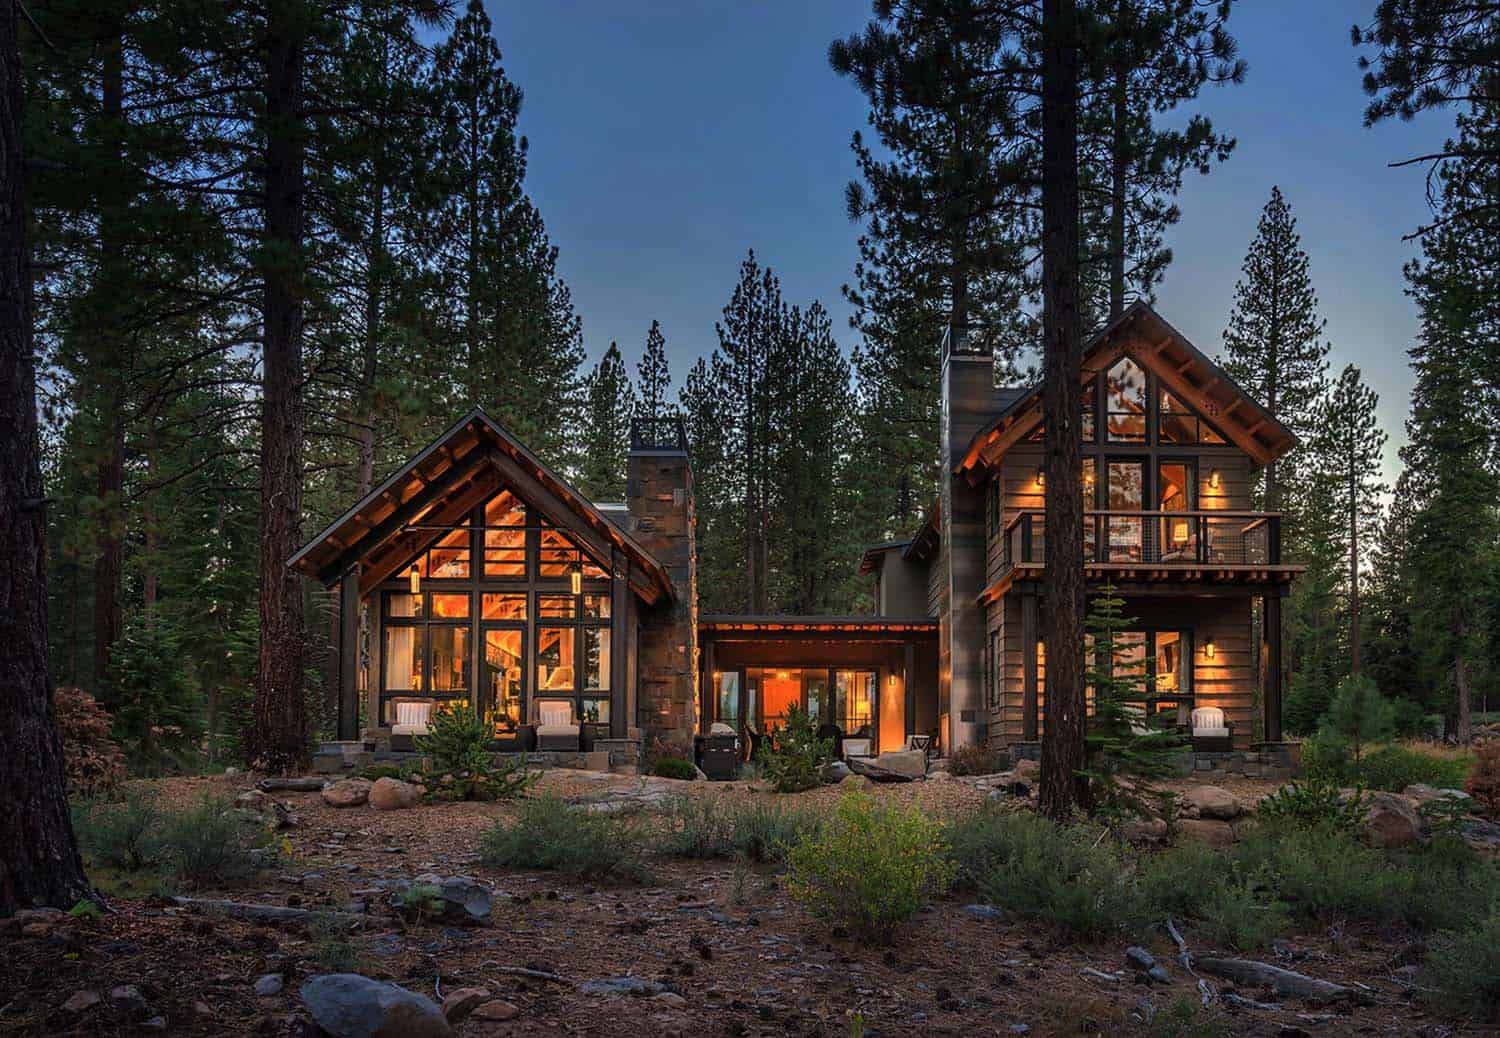 Rustic mountain house with a modern twist in Truckee, California